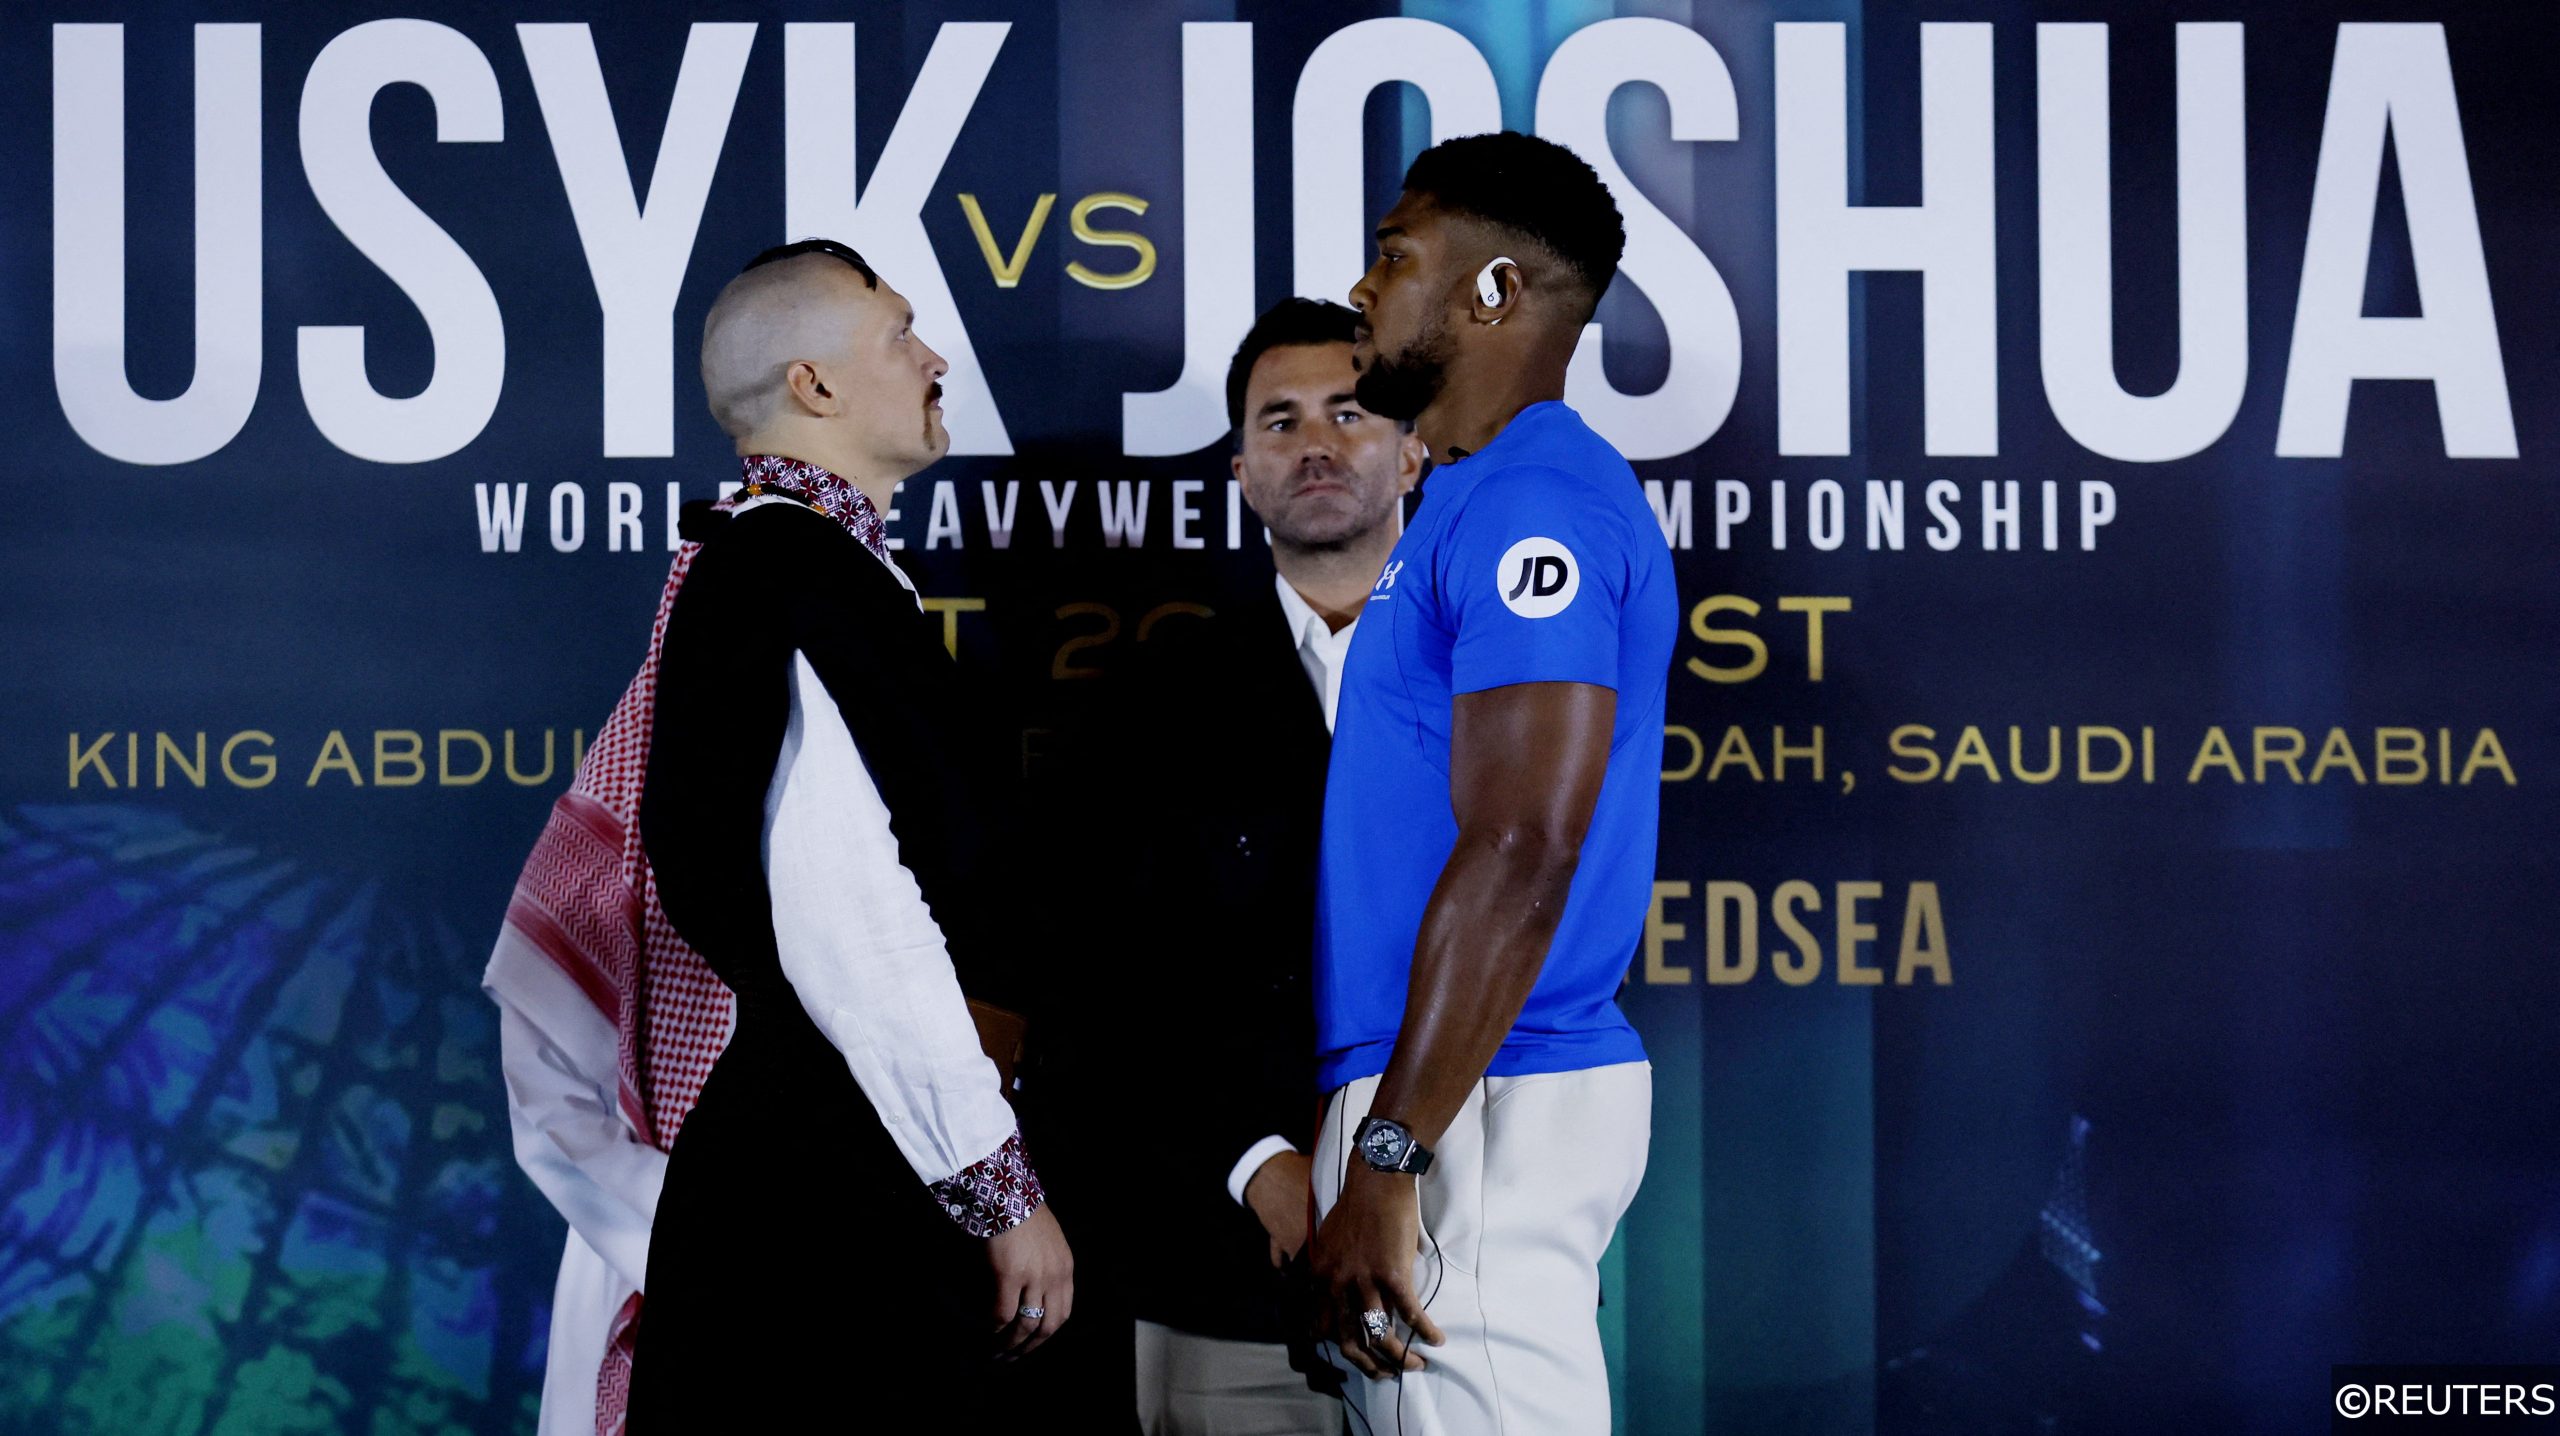 Usyk vs Joshua II predictions and tips with 77/1 boxing acca! FST